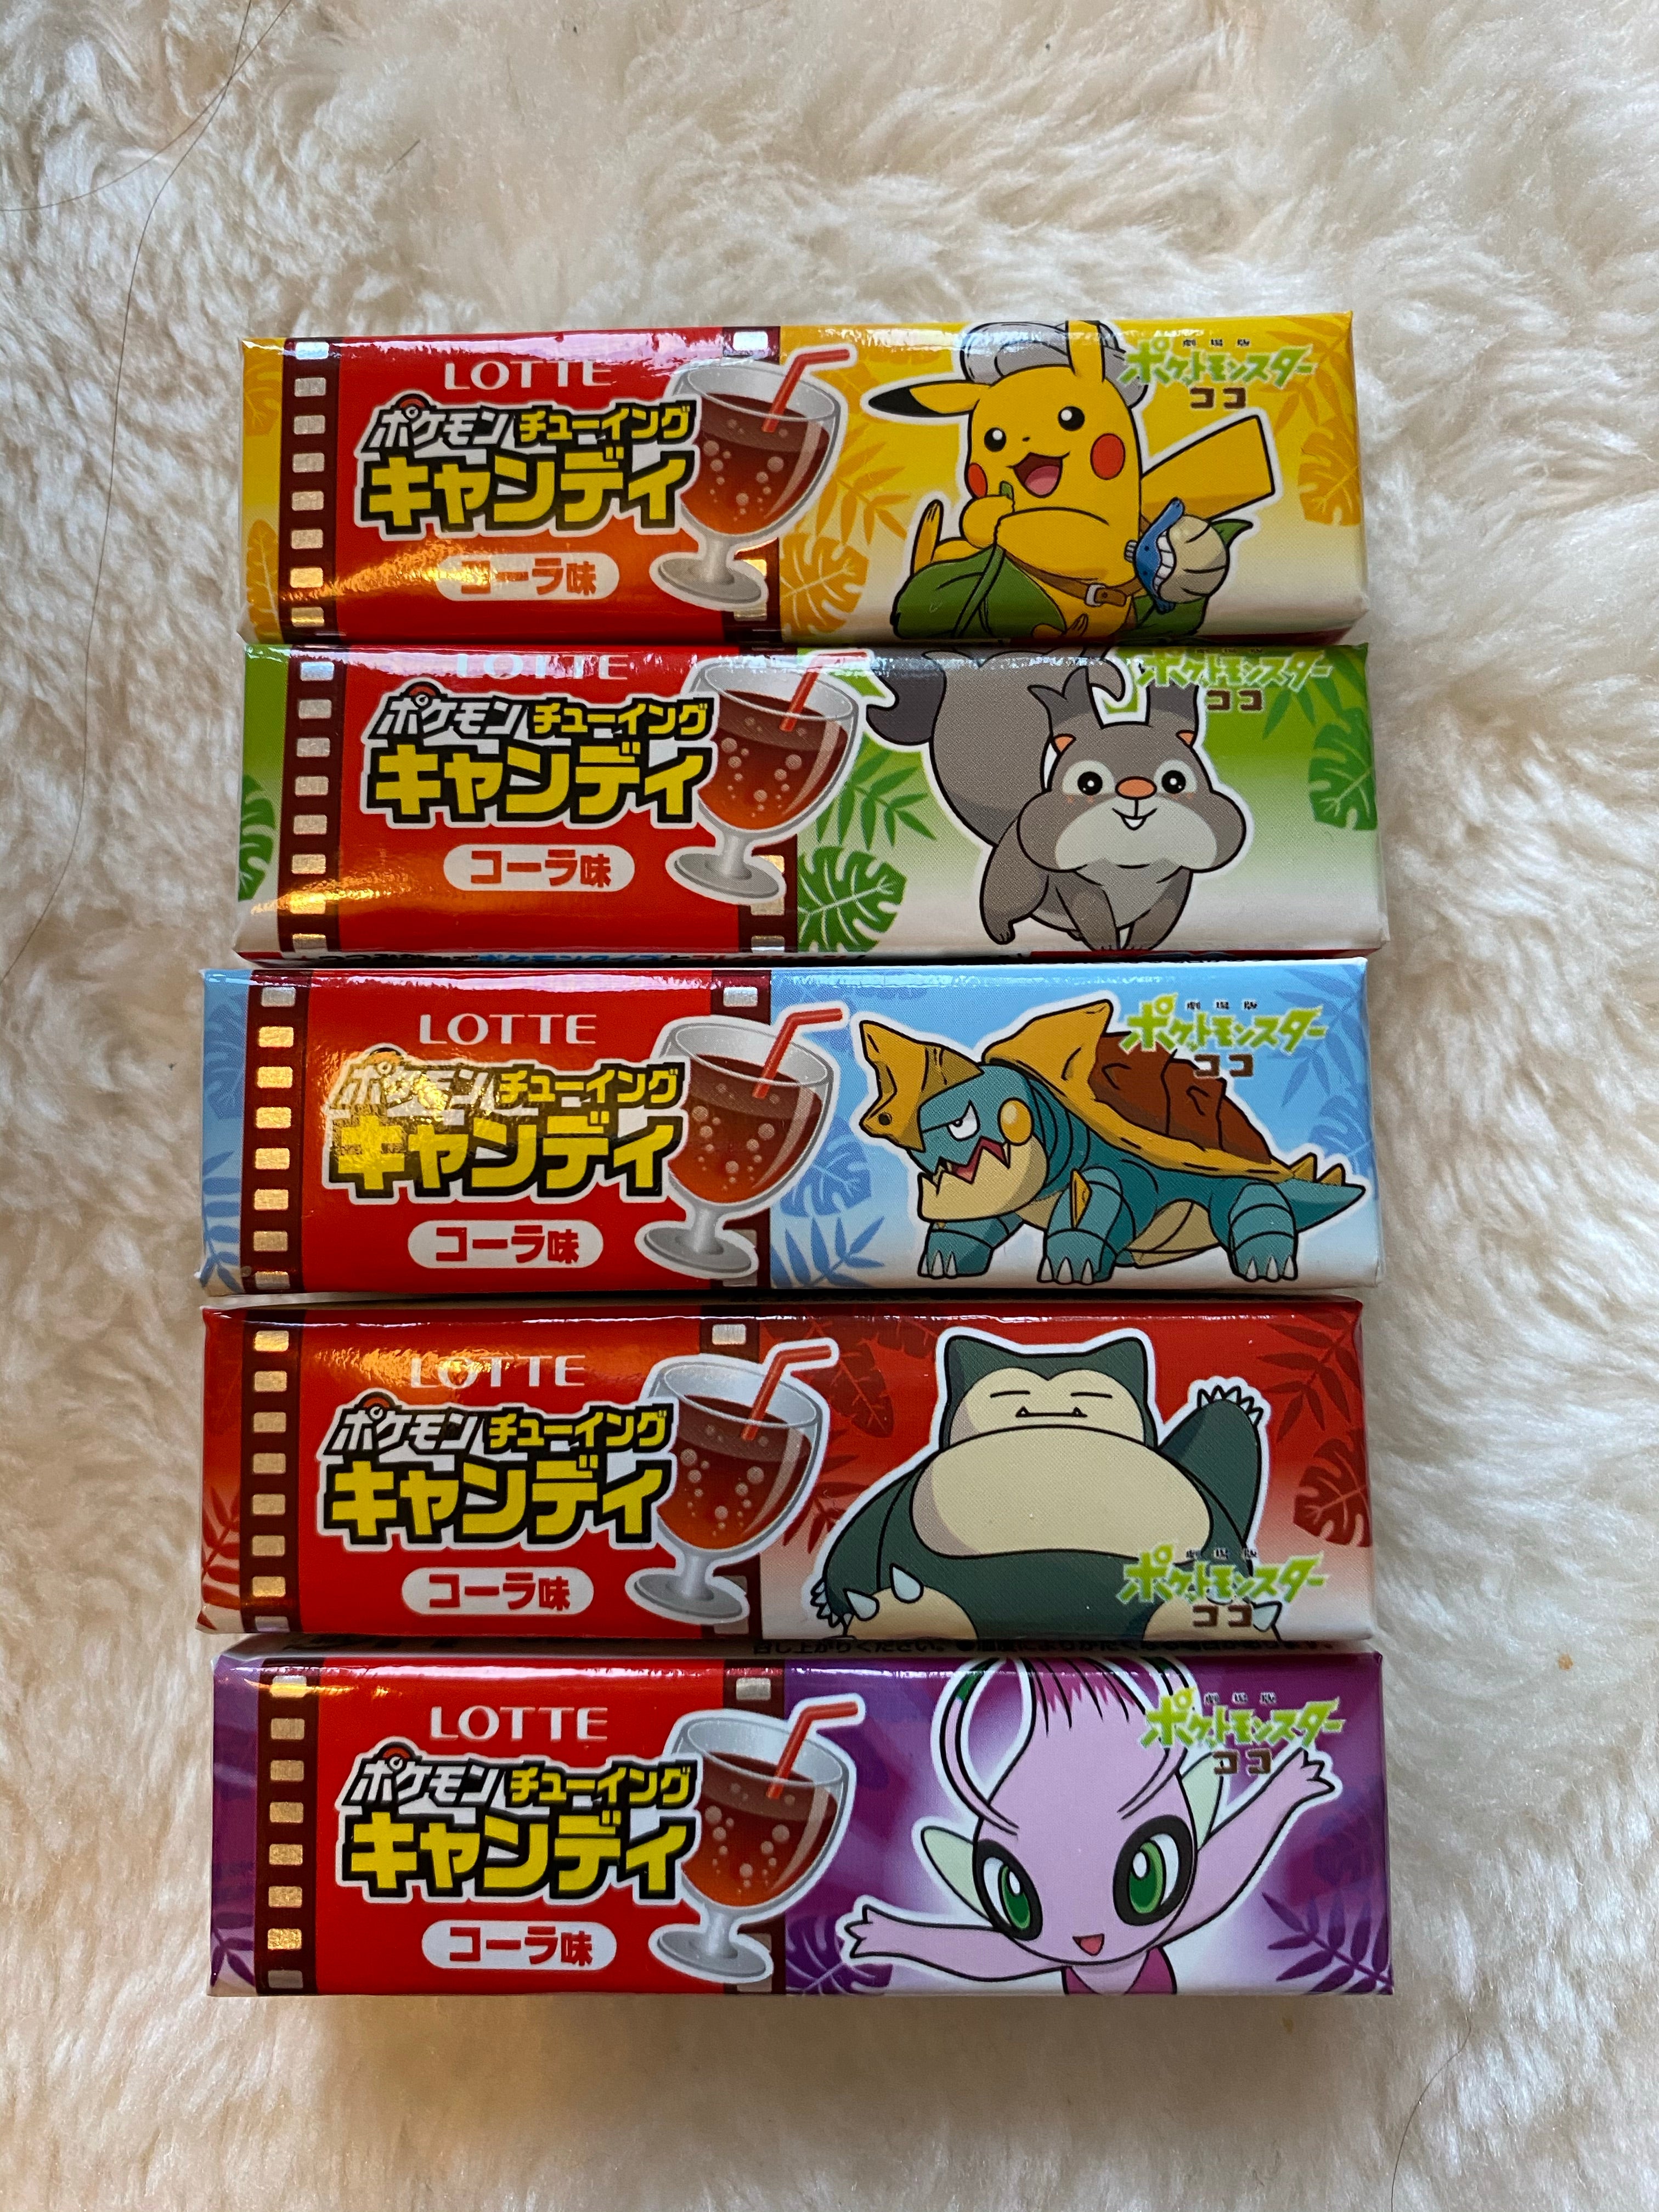 Lotte Pokemon Chewy Cola Candy 25g The Secret Asia